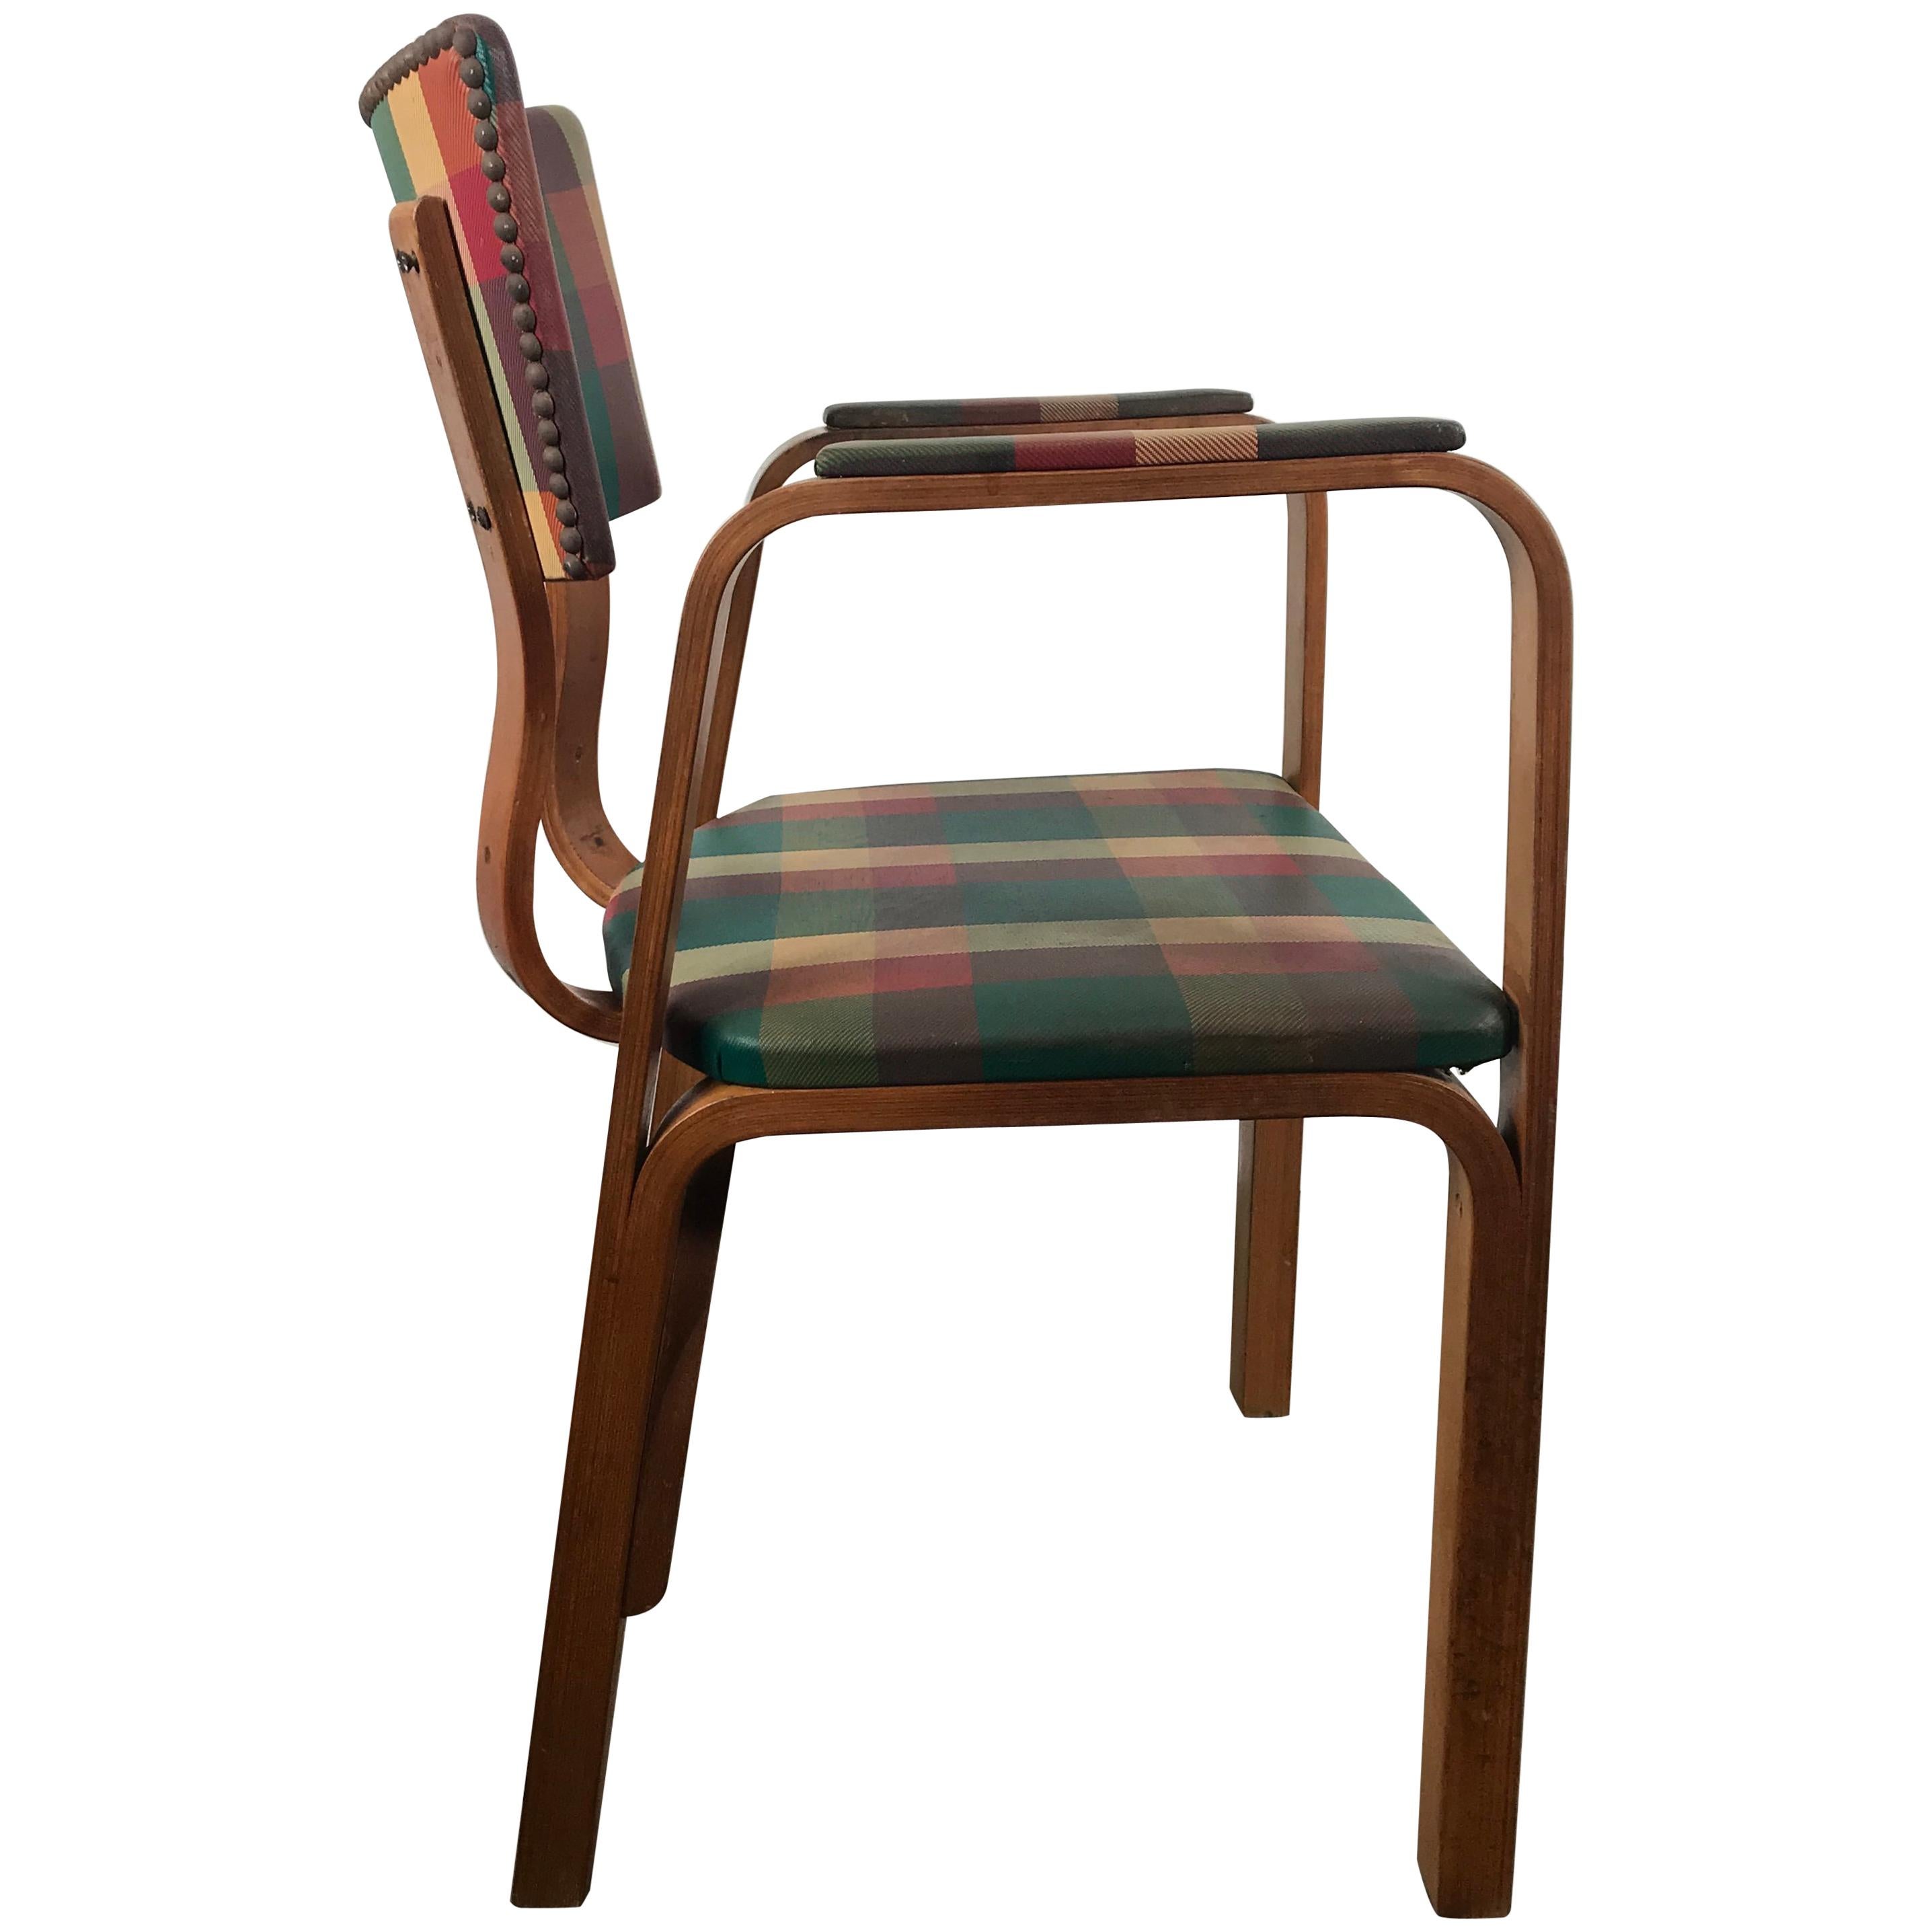 Classic Bentwood Armchair with Original Plaid Oil Cloth by Thonet Brothers 1940 For Sale